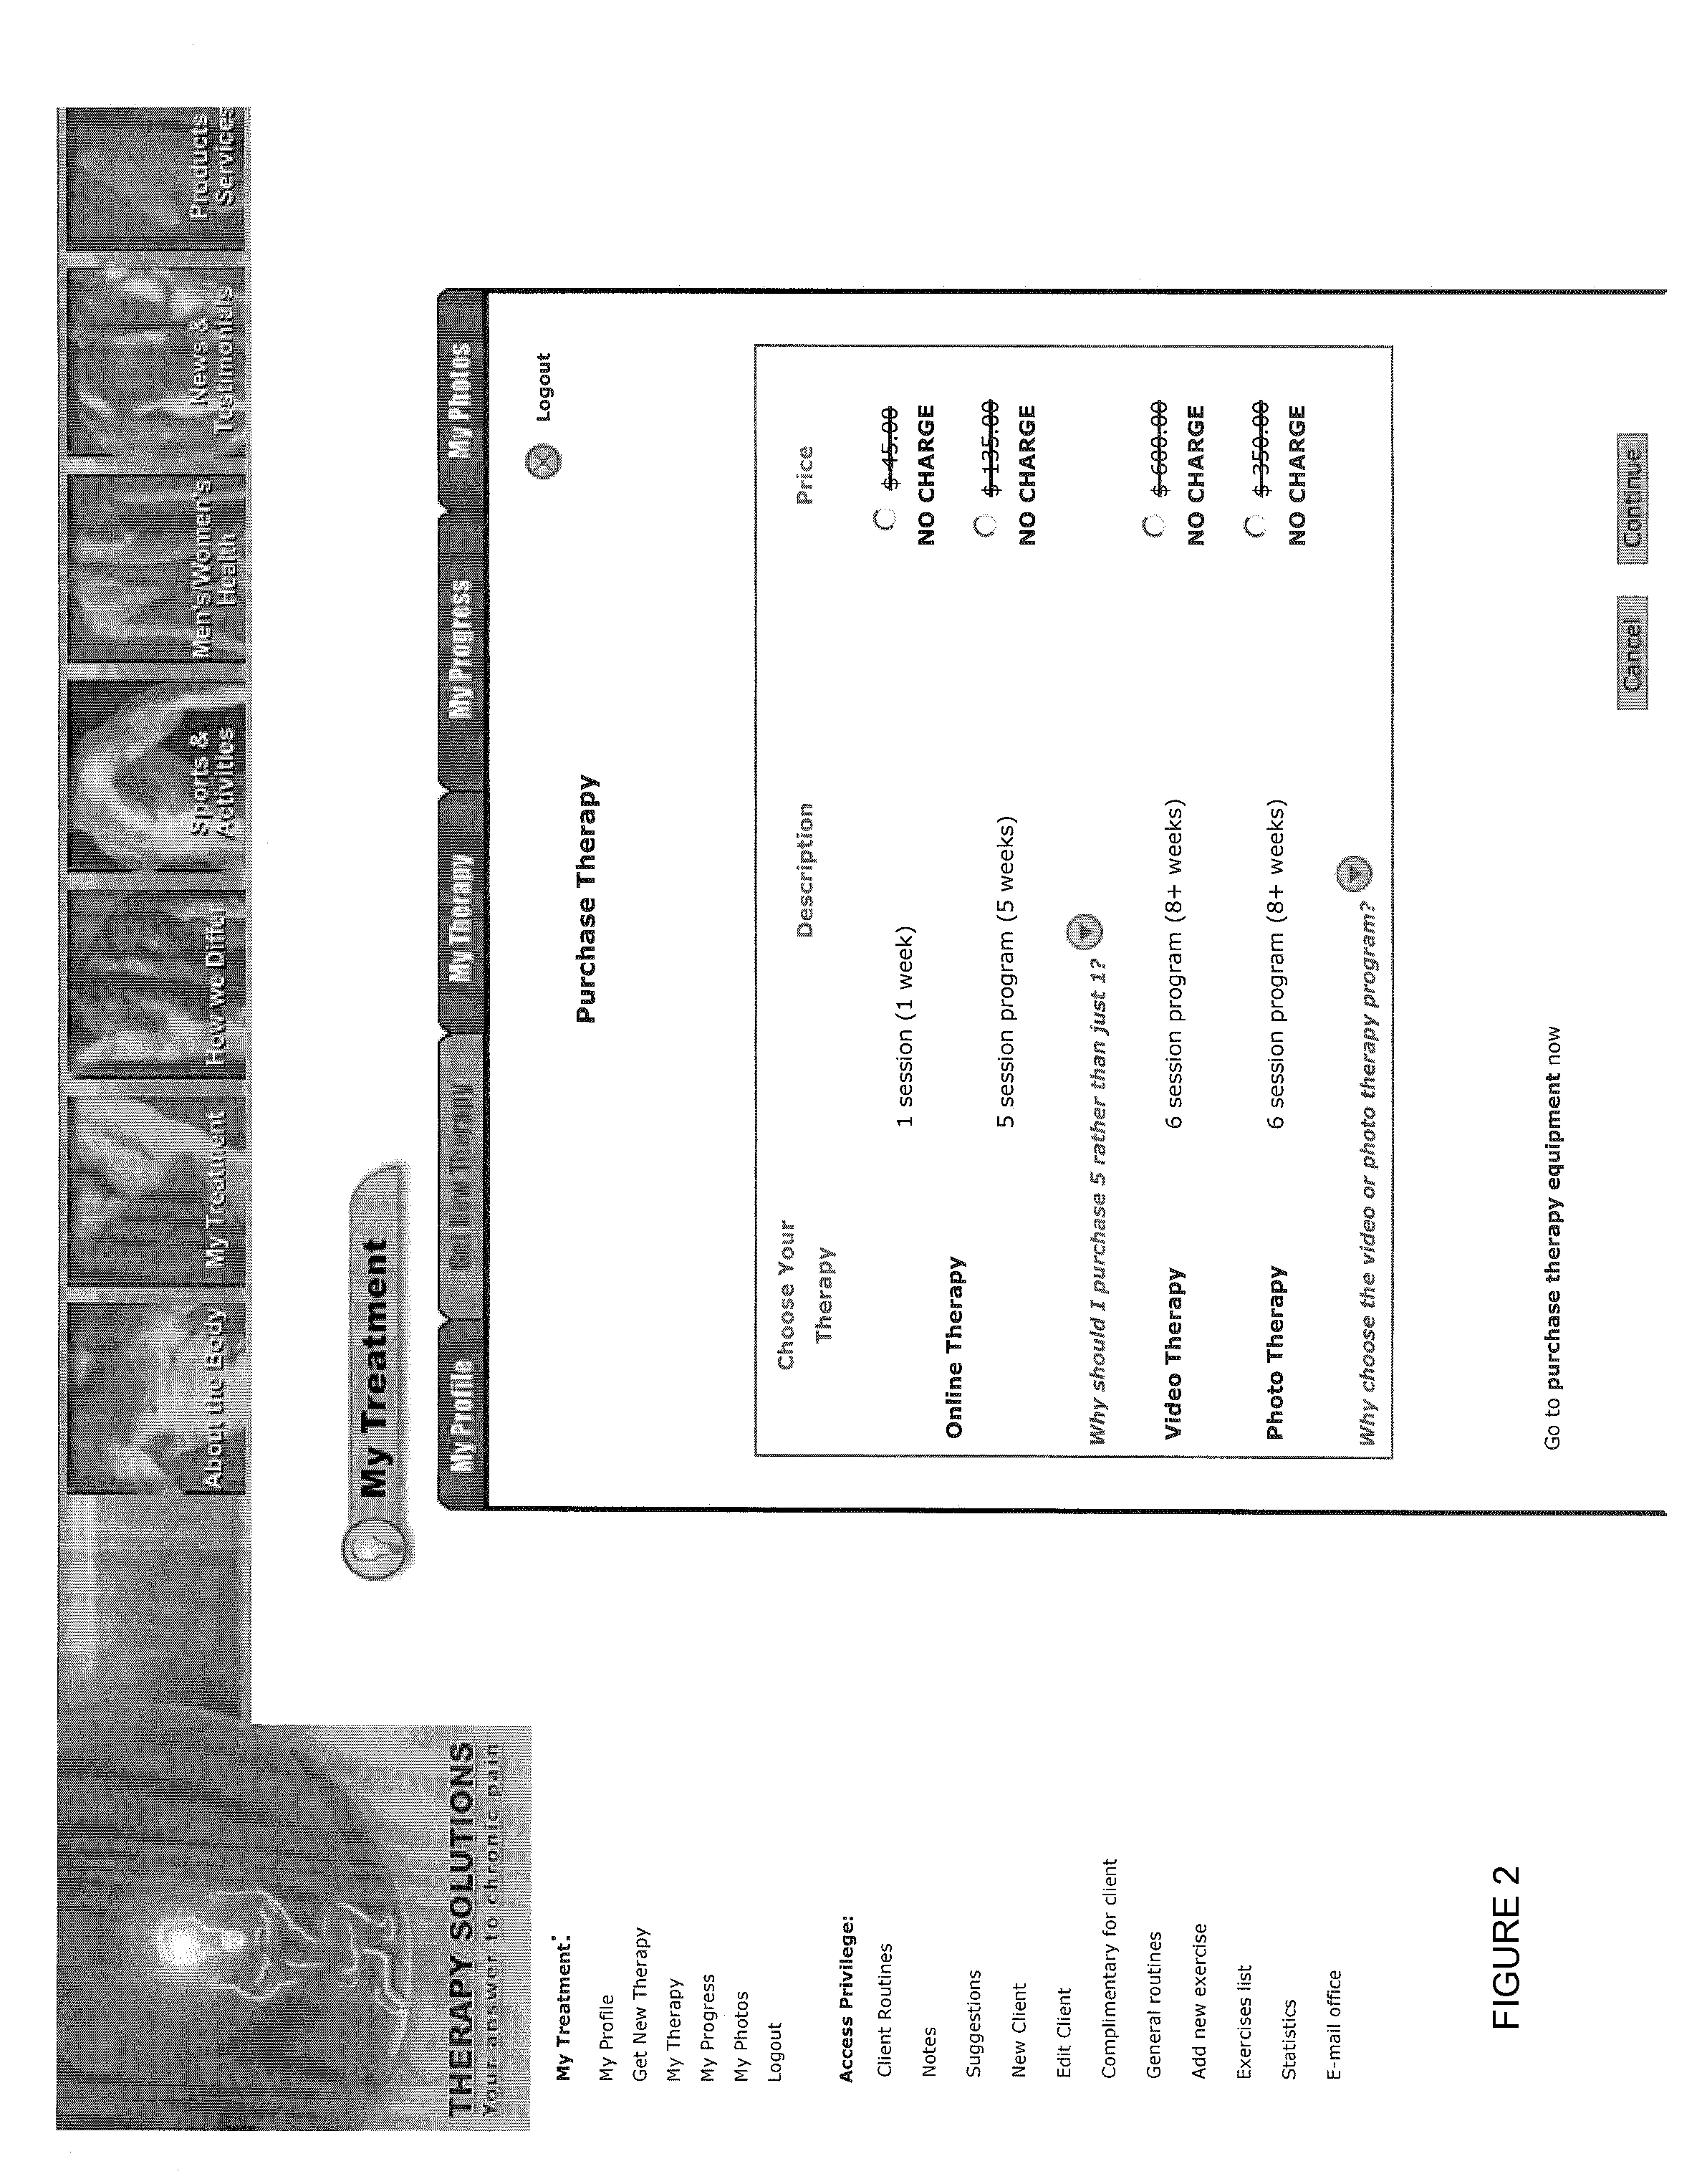 Anatomical pain elimination system and methods for delivering personalized anatomical therapy sessions